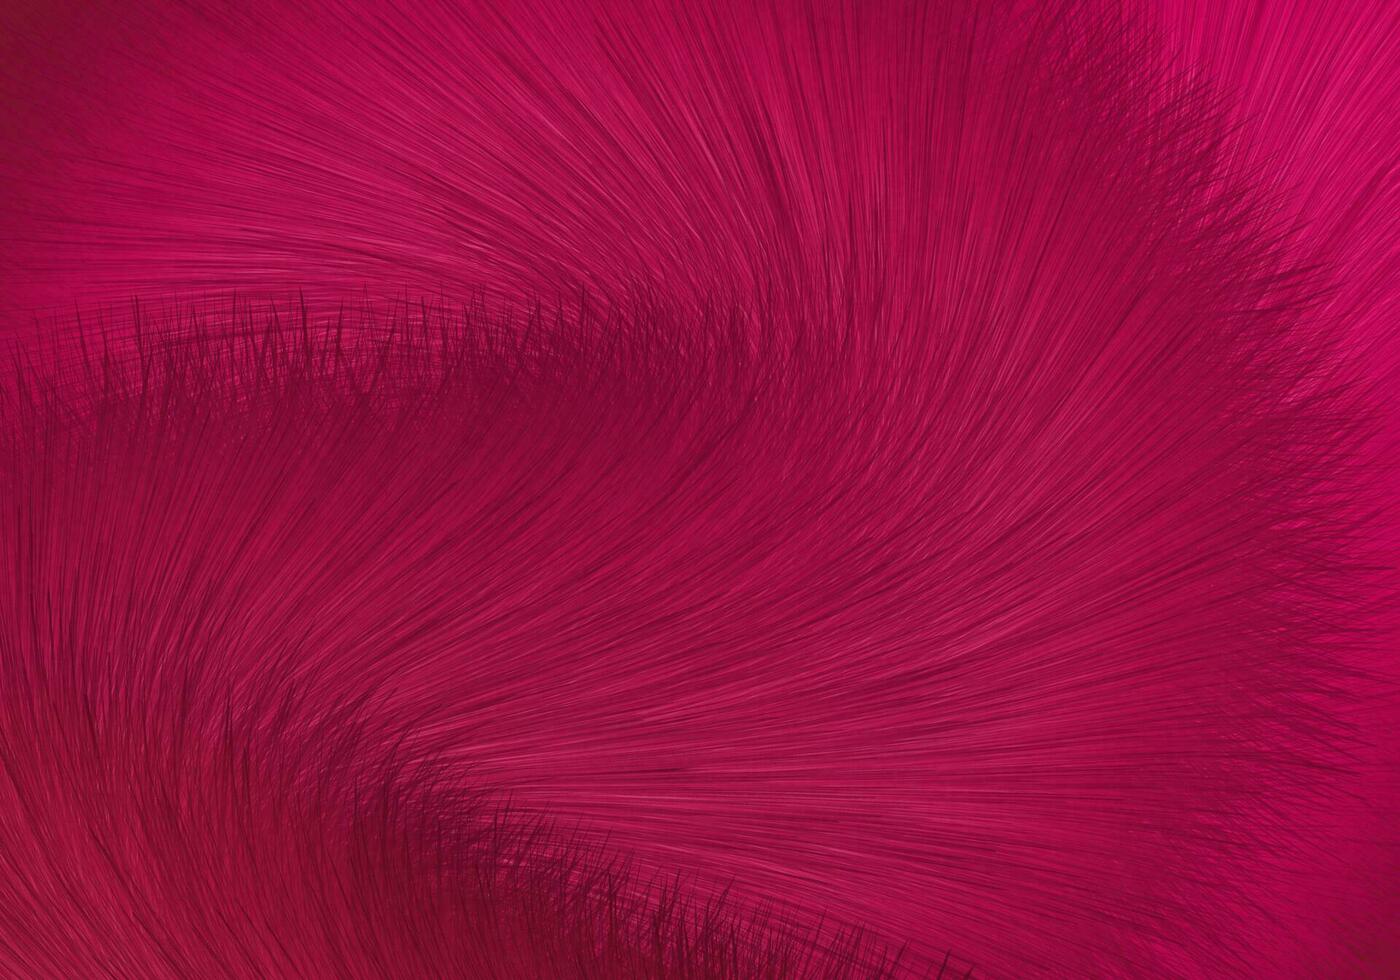 Vector Abstract fluffy background with burgundy fur texture. Vector illustration for cover, brochure, wallpaper, card, etc.